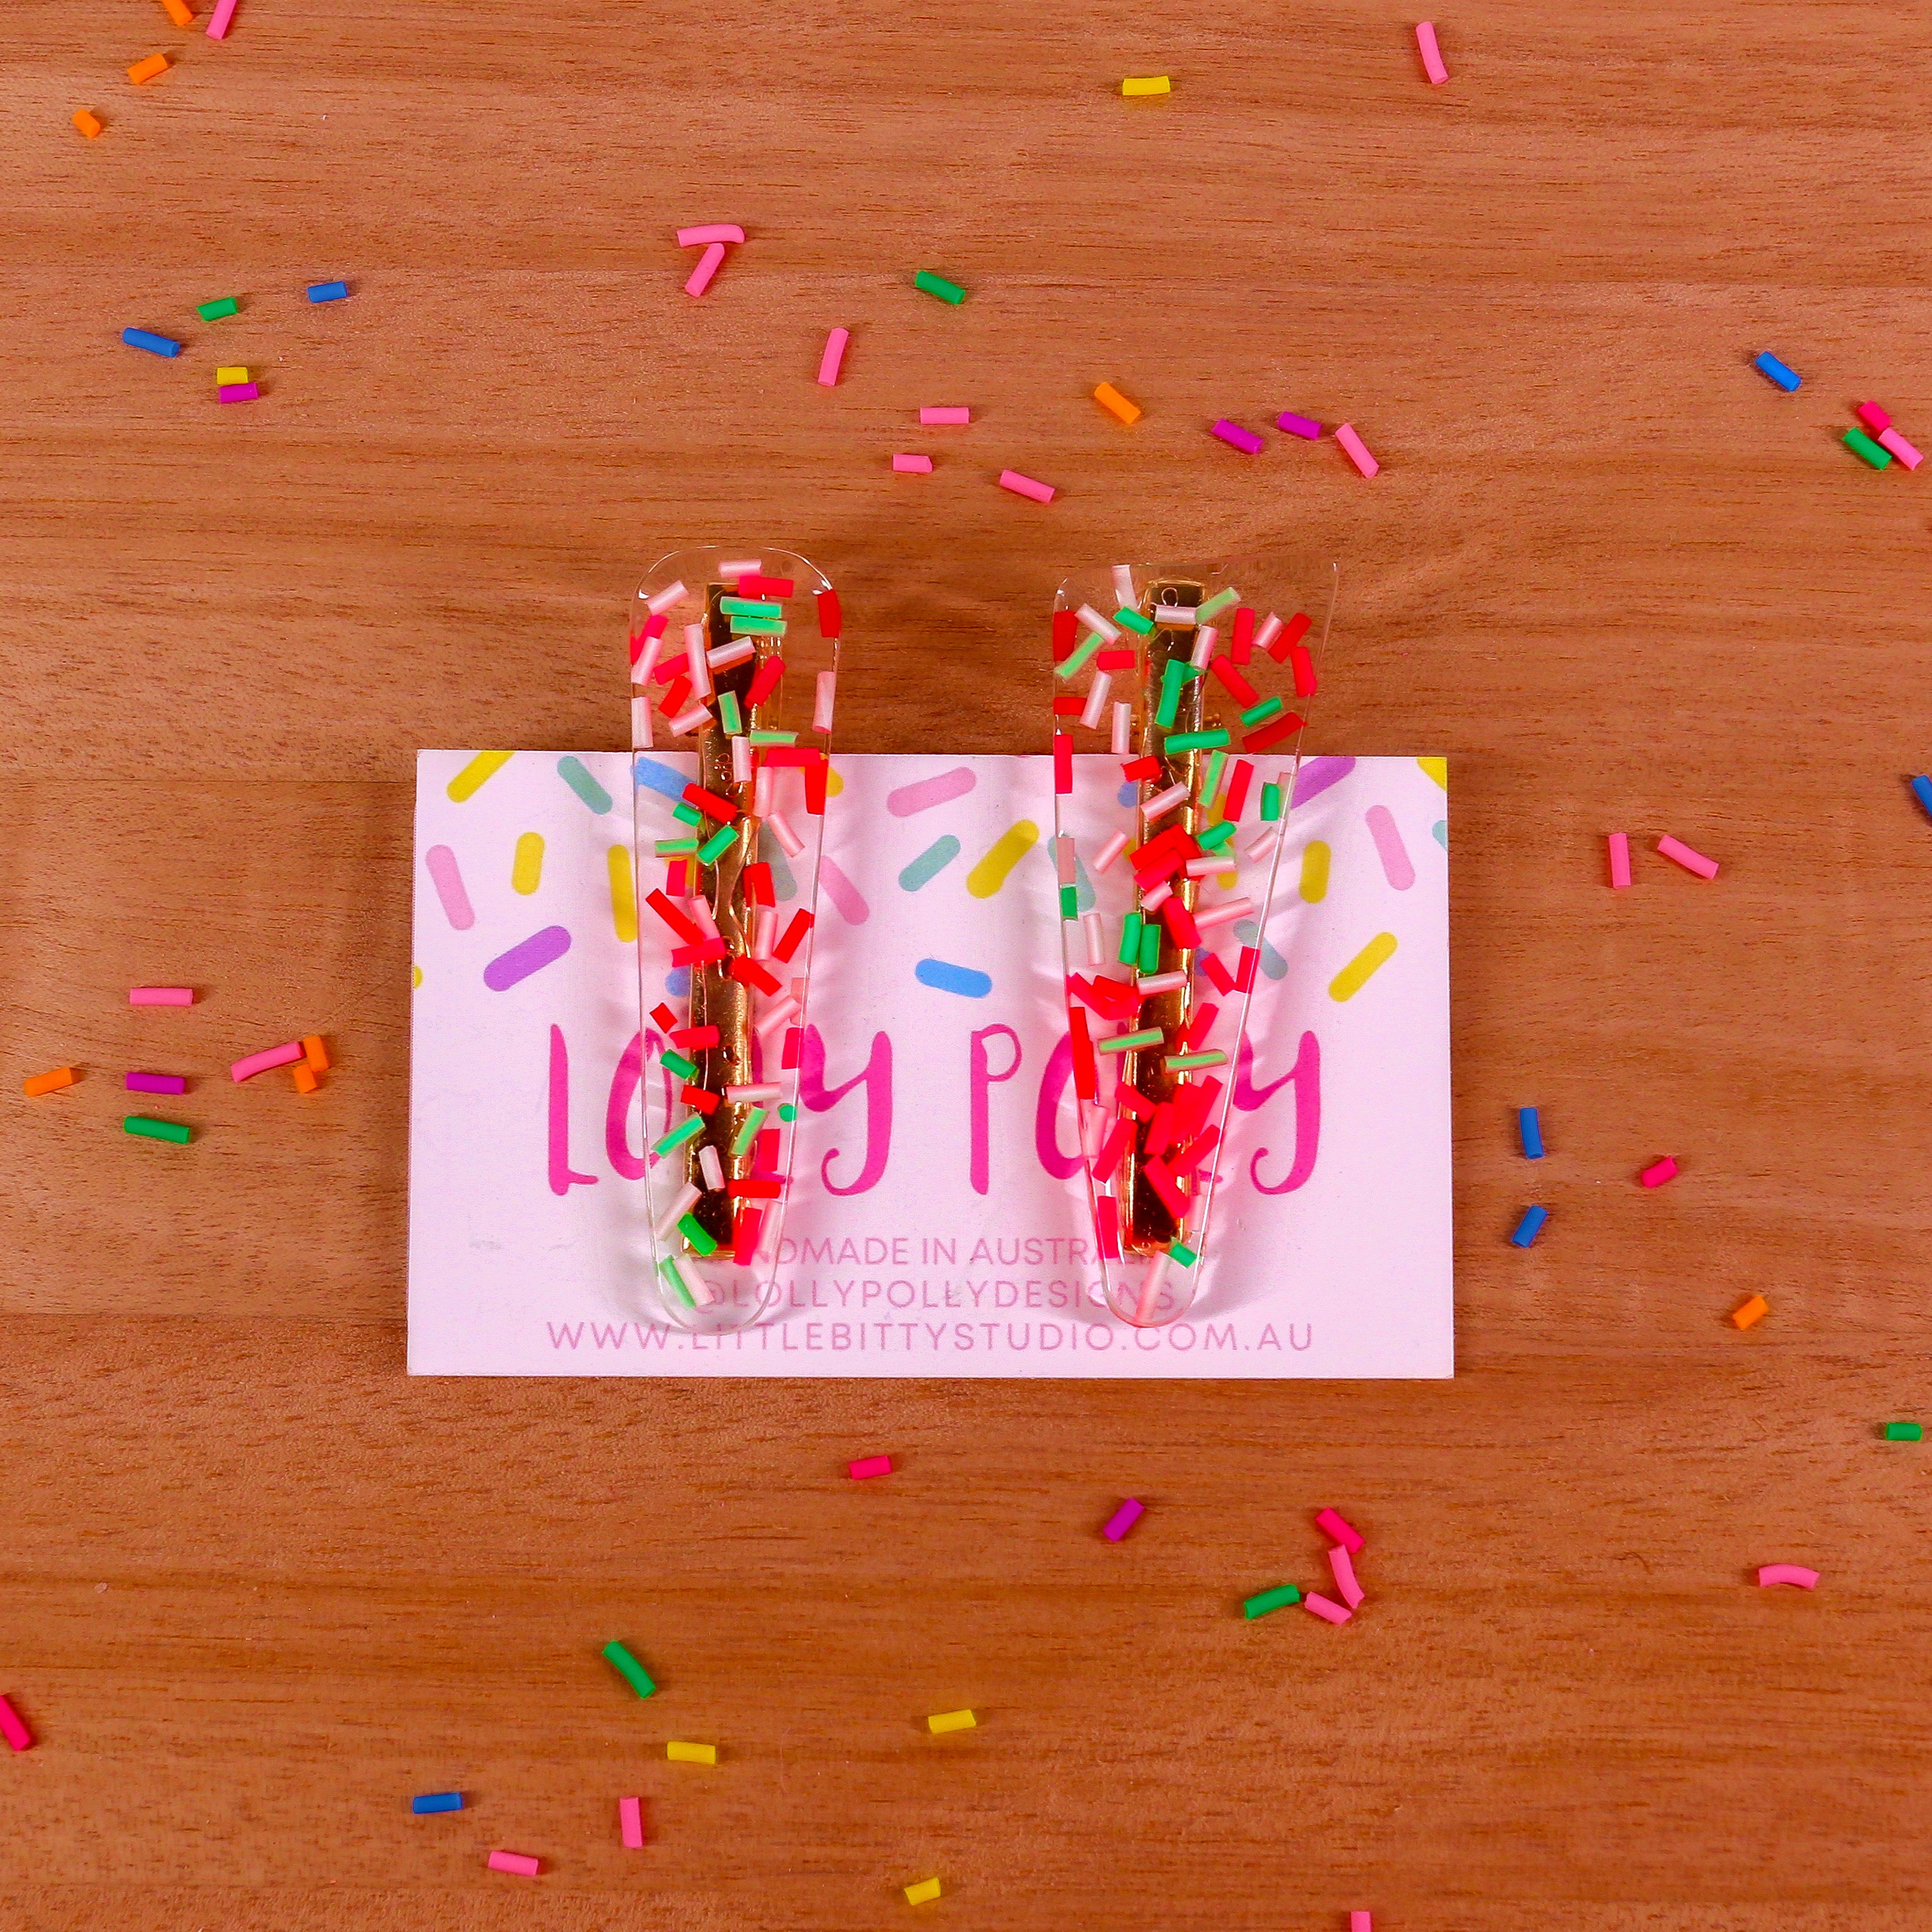 SET OF 2 SPRINKLES HAIR CLIPS  - LOLLY POLLY X NEON HEART DESIGNS